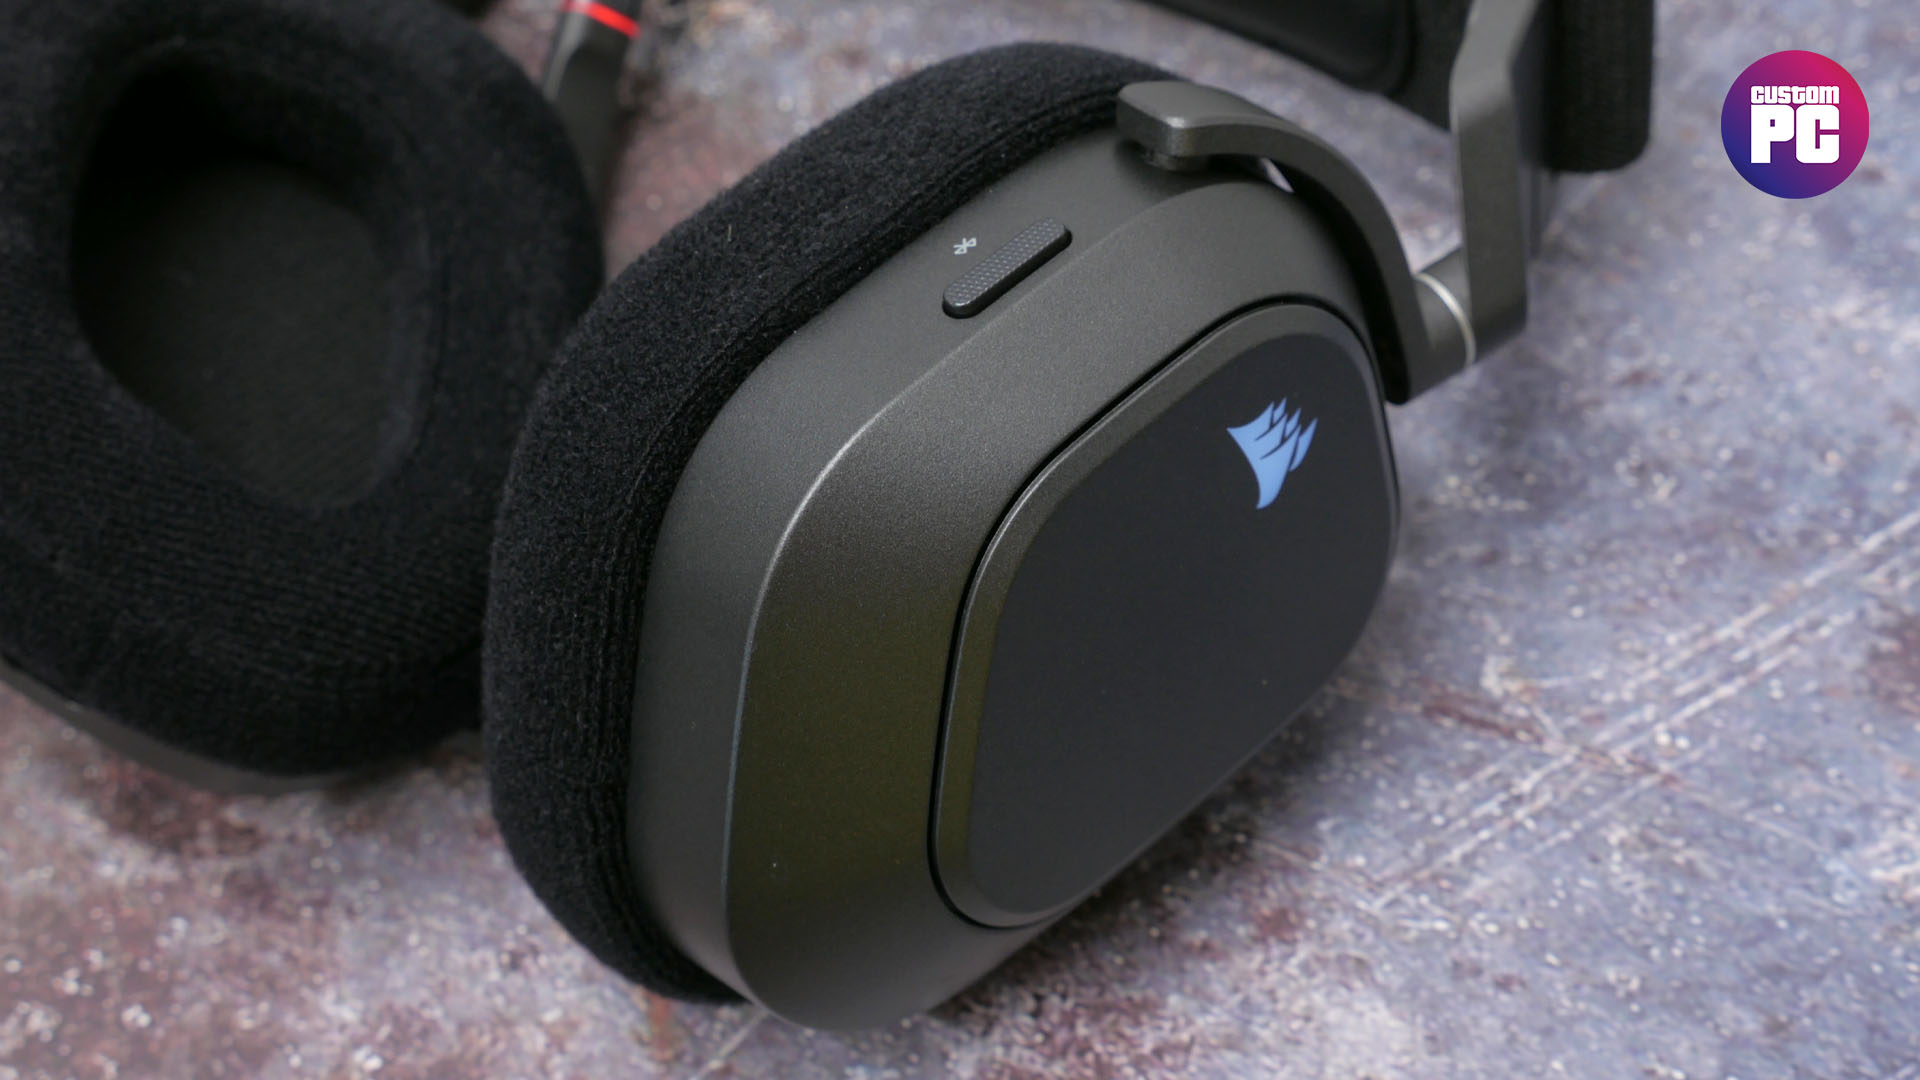 Corsair HS80 Max review: Features aplenty, but quality is a question -  Reviewed